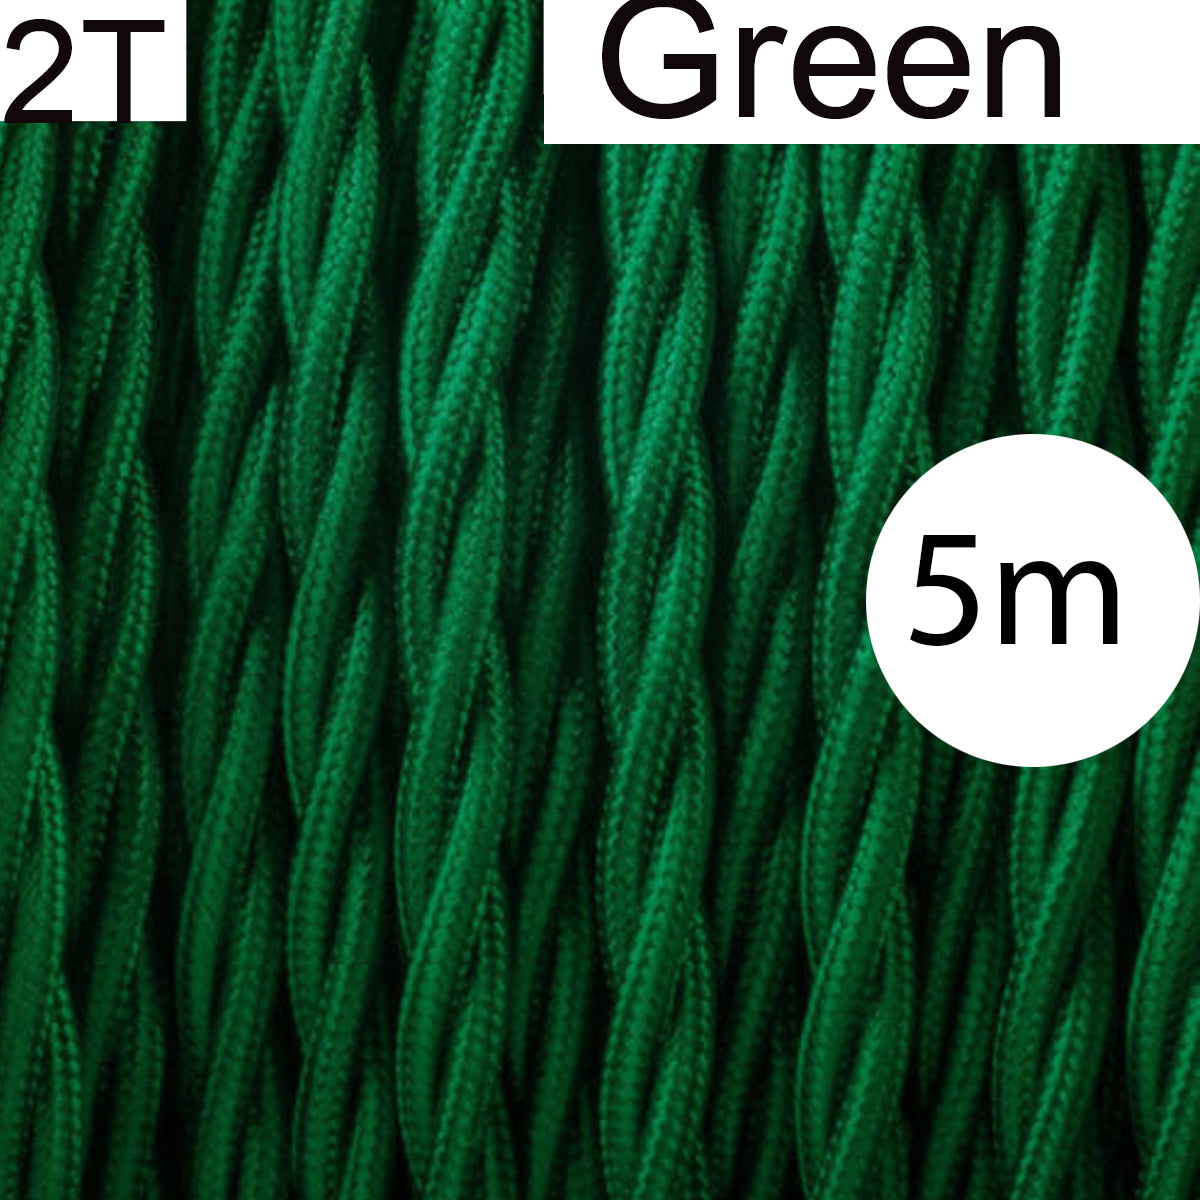 Green fabric Braided Cable.JPG